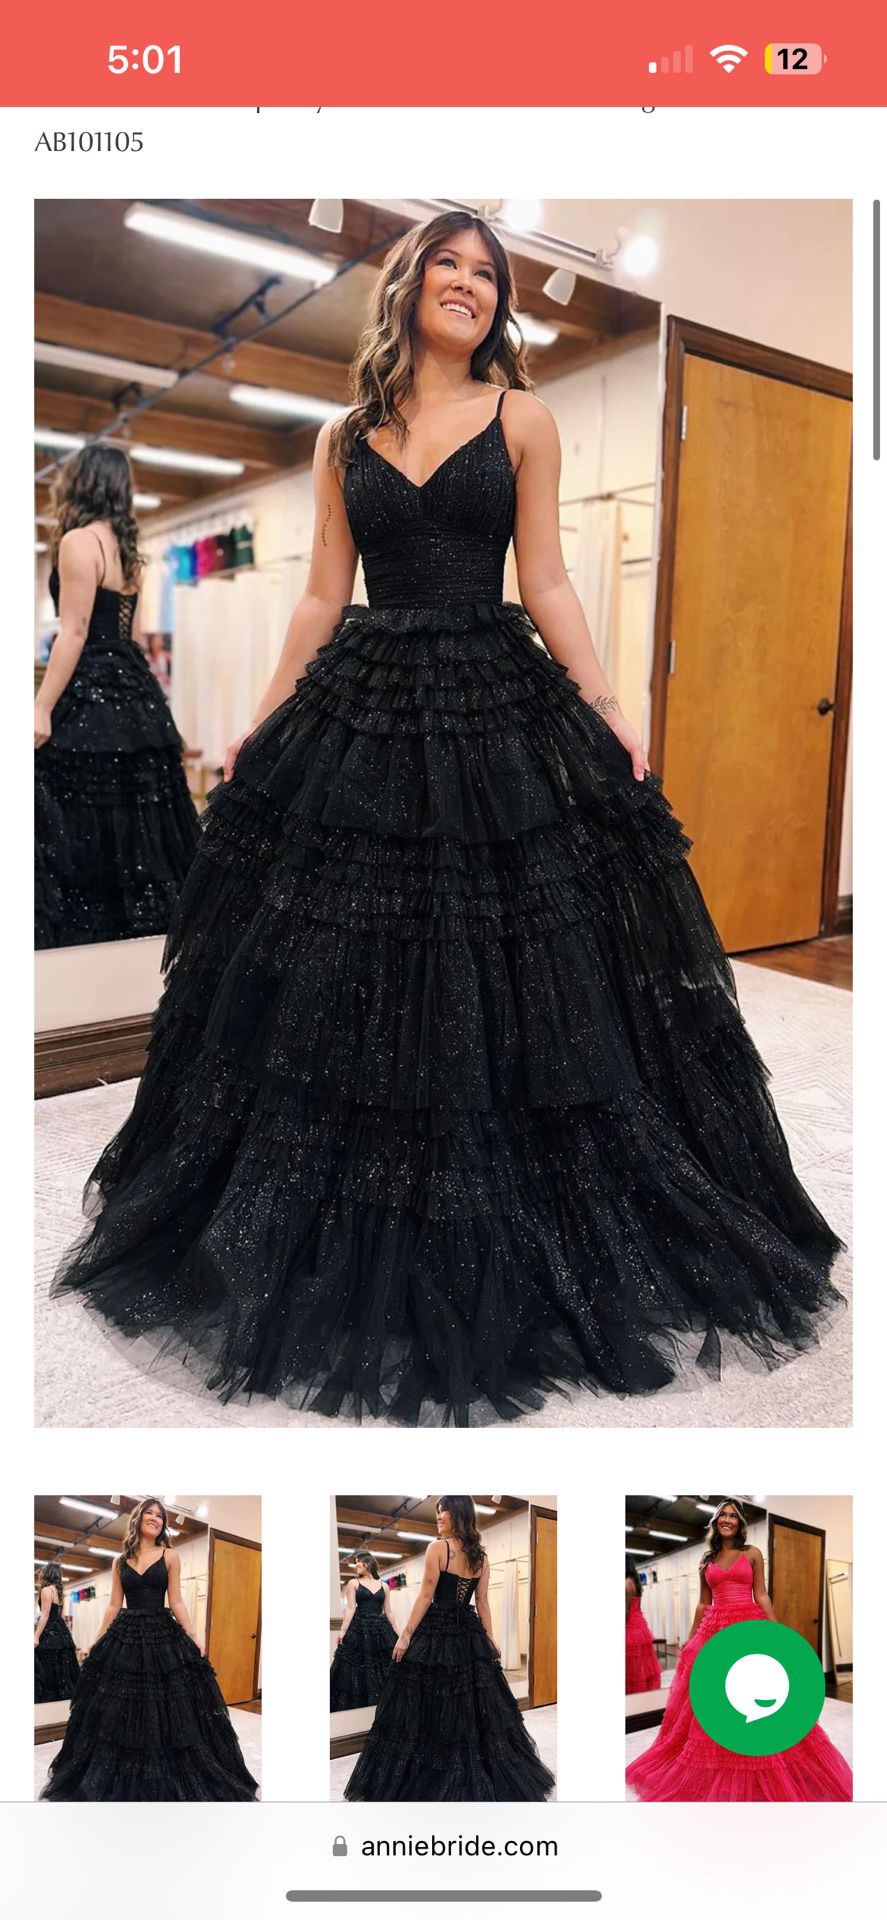 Puffy Black Sparkly Long Prom Dress